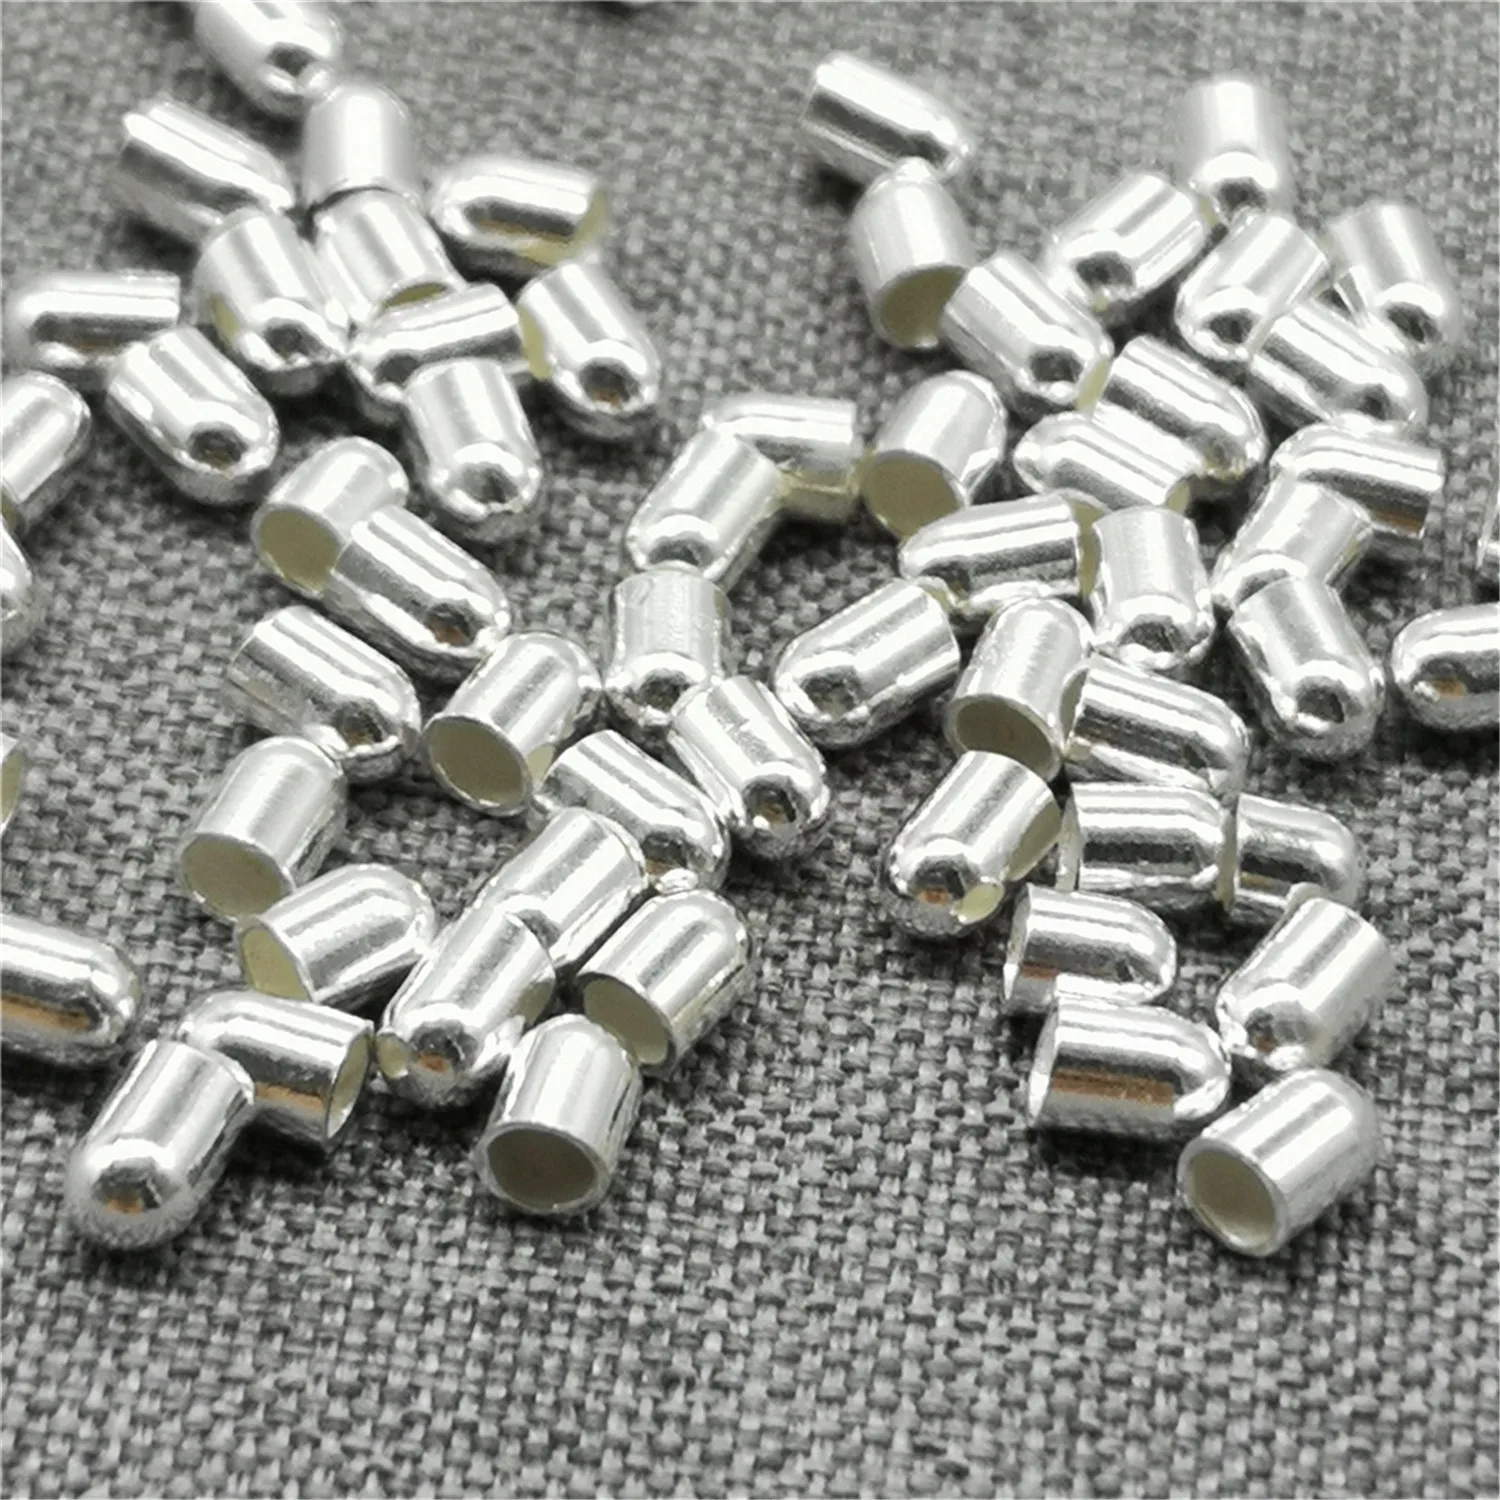 10pcs of 925 Sterling Silver Tiny Cord End Caps w/ 2mm 3mm Hole for Bracelet Necklace